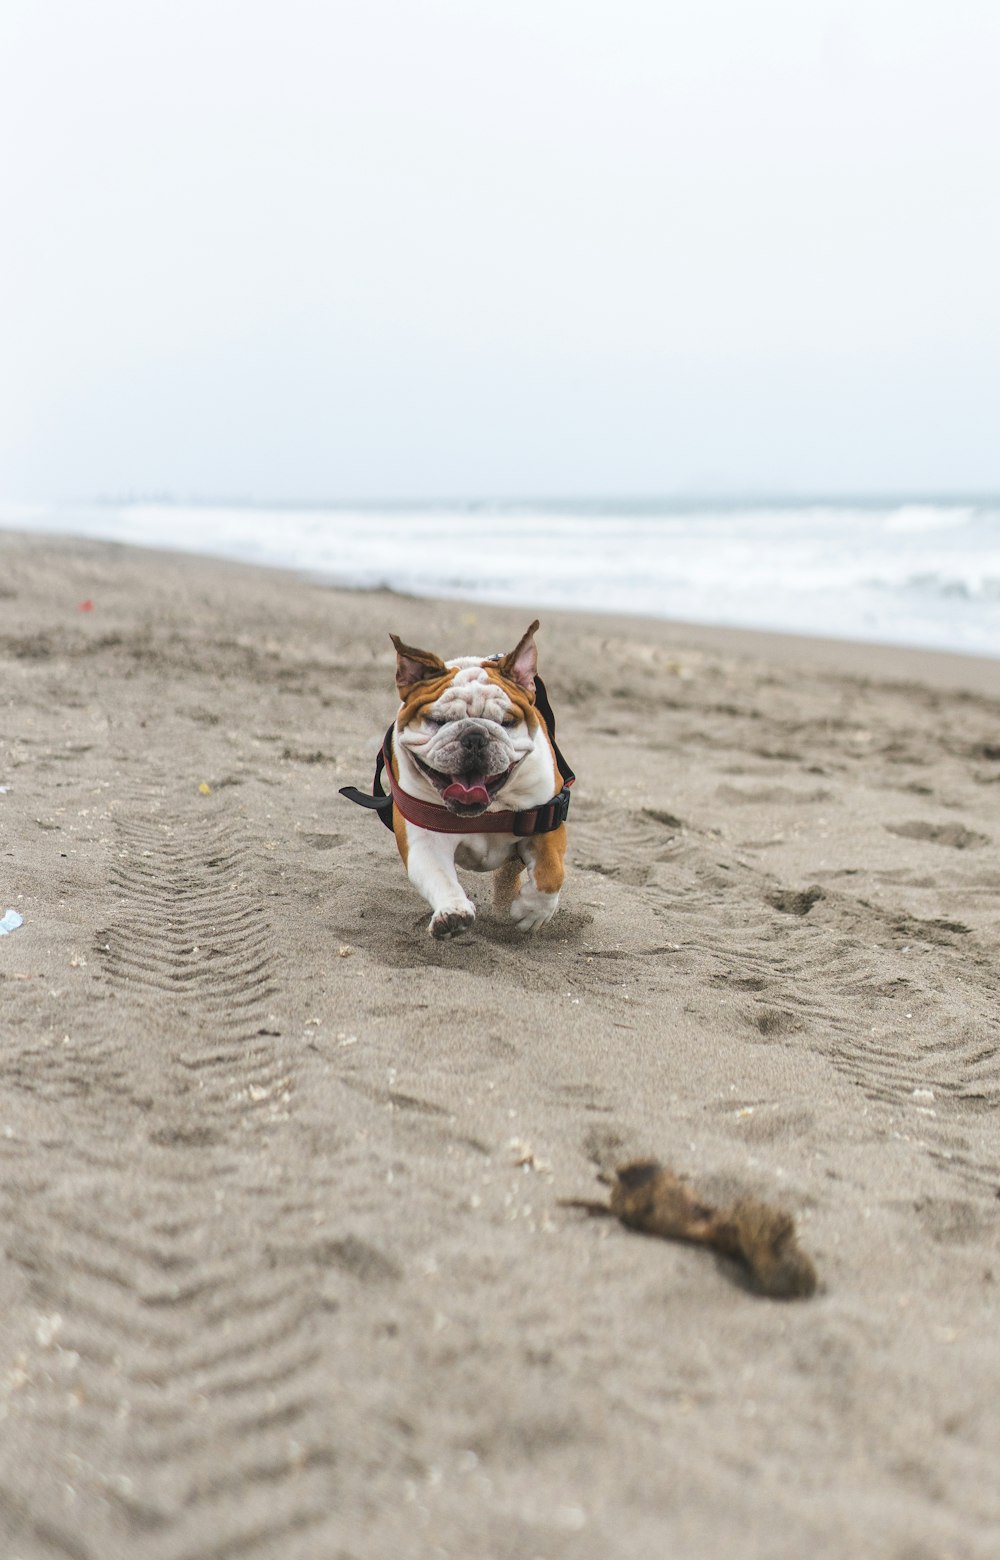 brown and white short coated dog running on beach during daytime